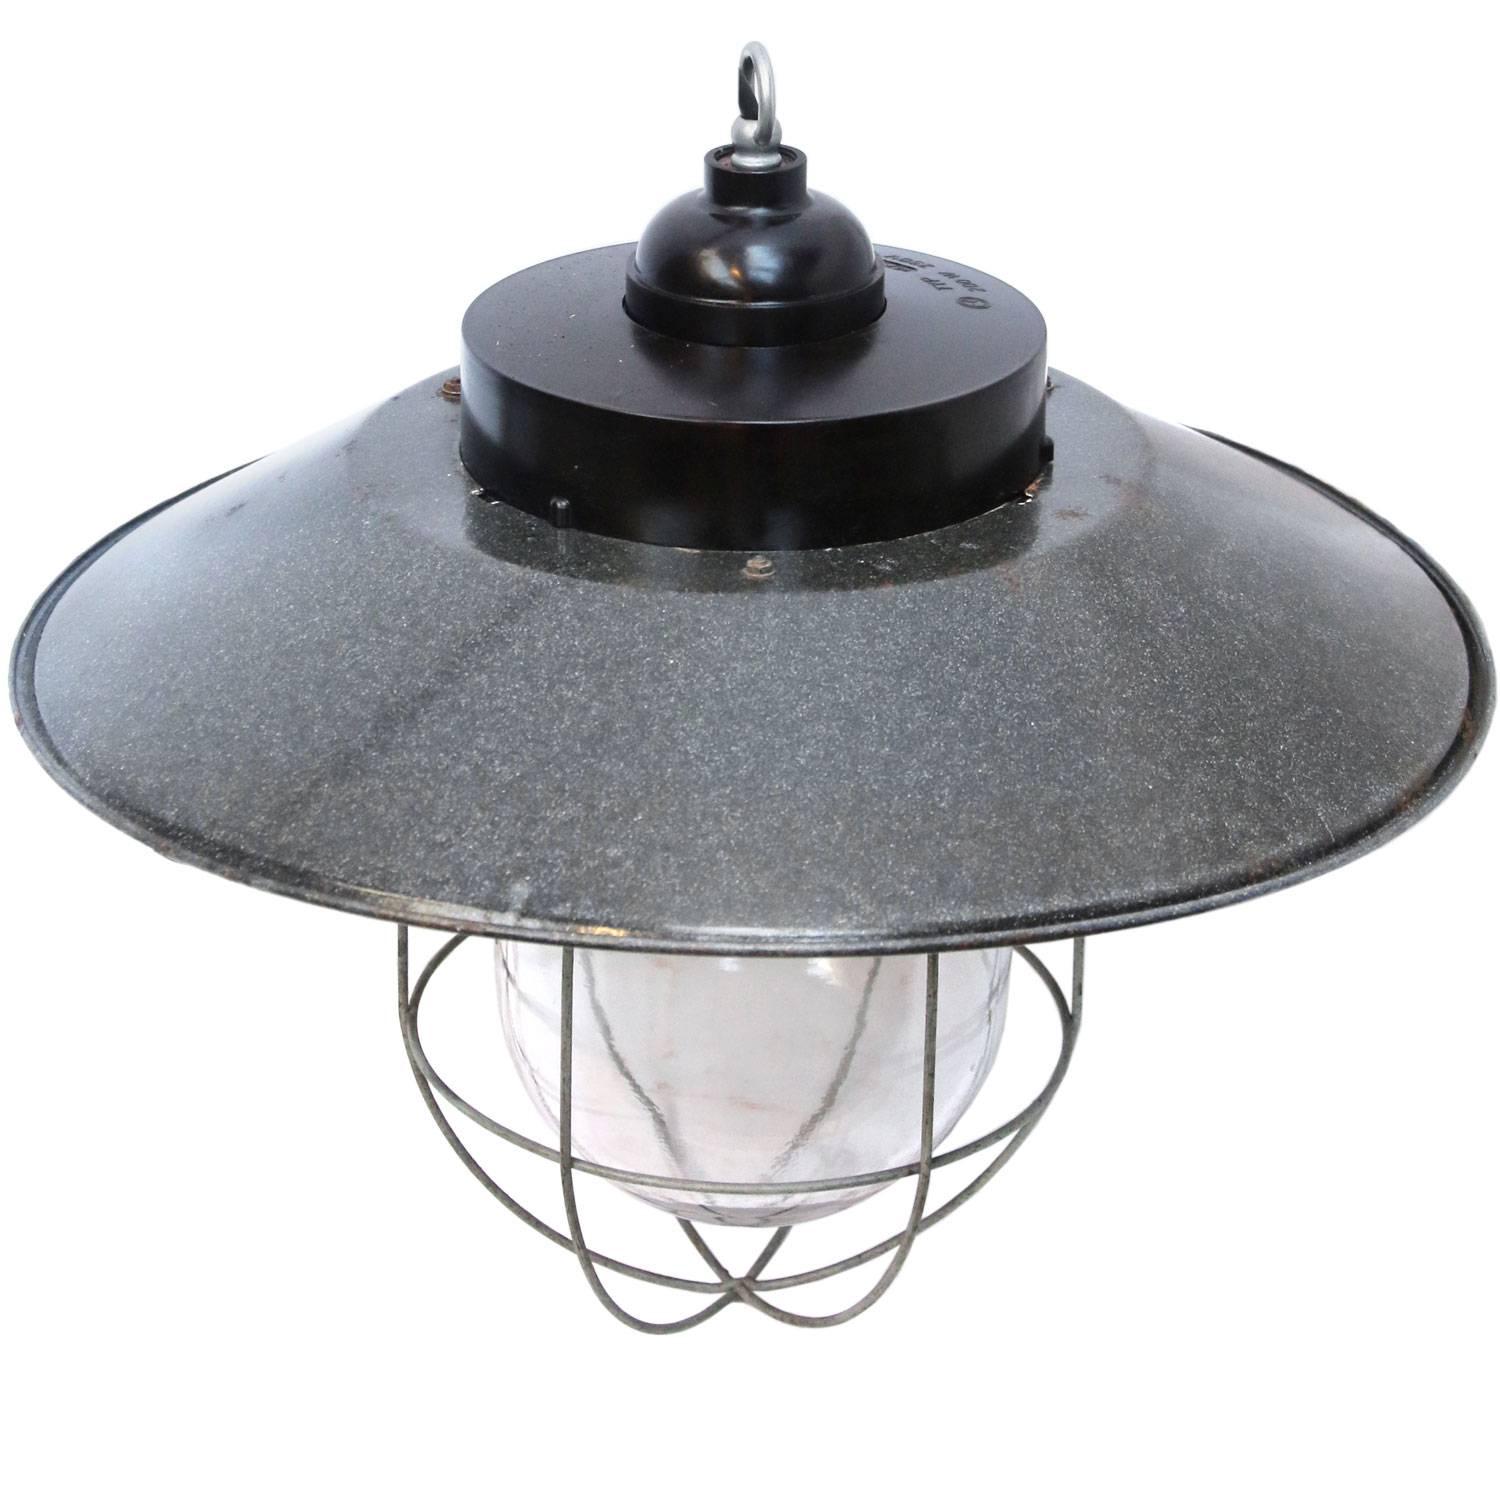 Industrial lights. Grey enamel white interior. Bakelite top. Clear glass.

Measures: Weight: 3.5 kg / 7.7 lb

All lamps have been made suitable by international standards for incandescent light bulbs, energy-efficient and LED bulbs. E26/E27 bulb